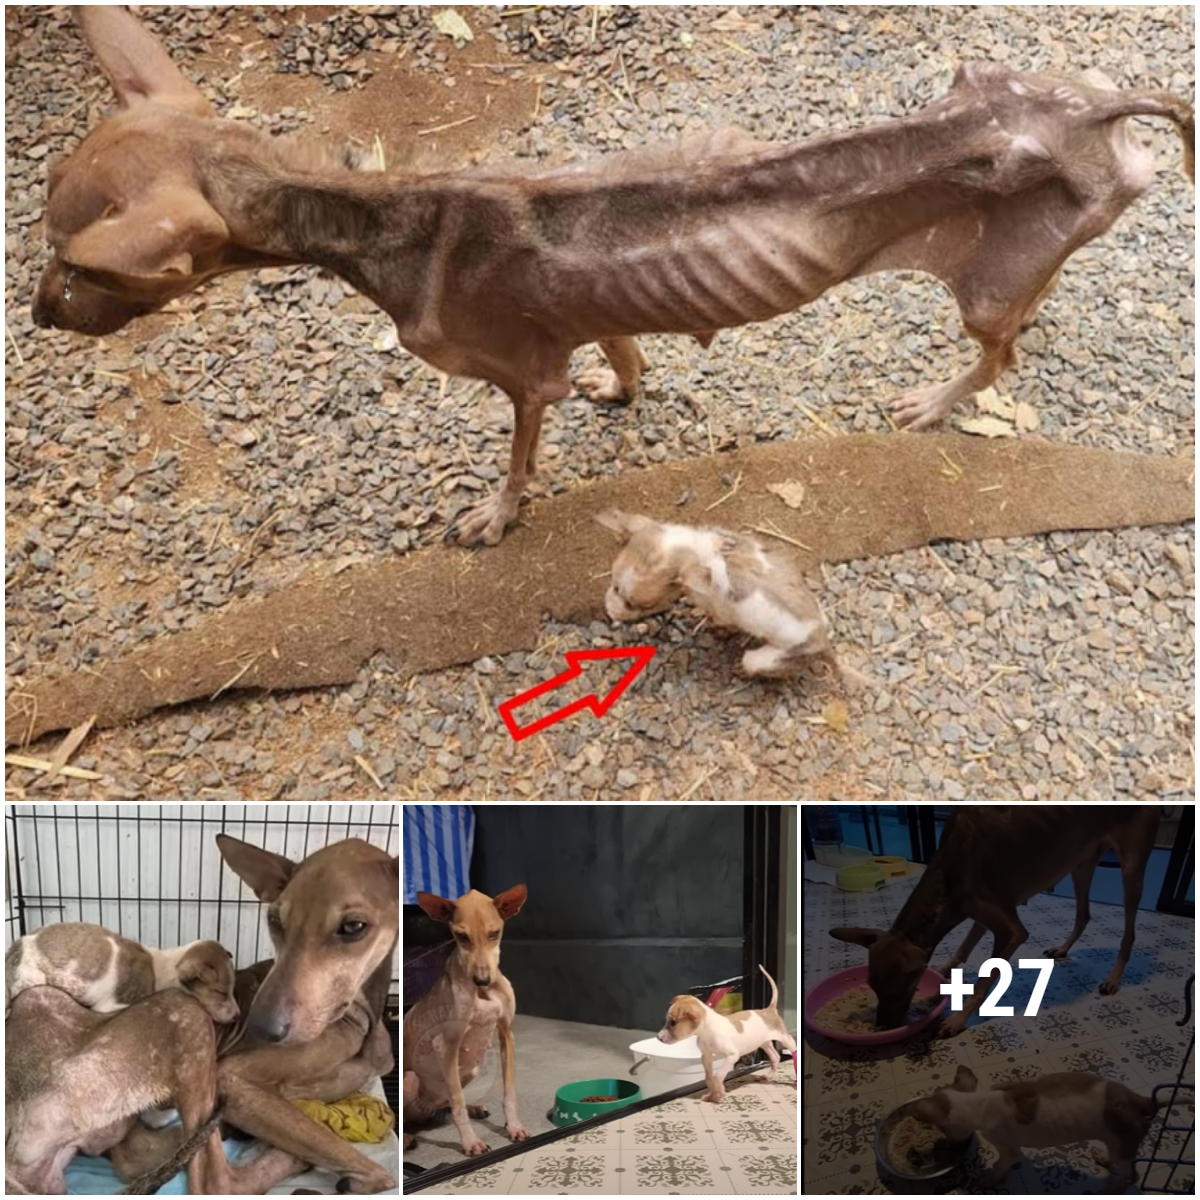 A malnourished mother dog and her puppies were found wandering on the side of the road and clinging to people for help